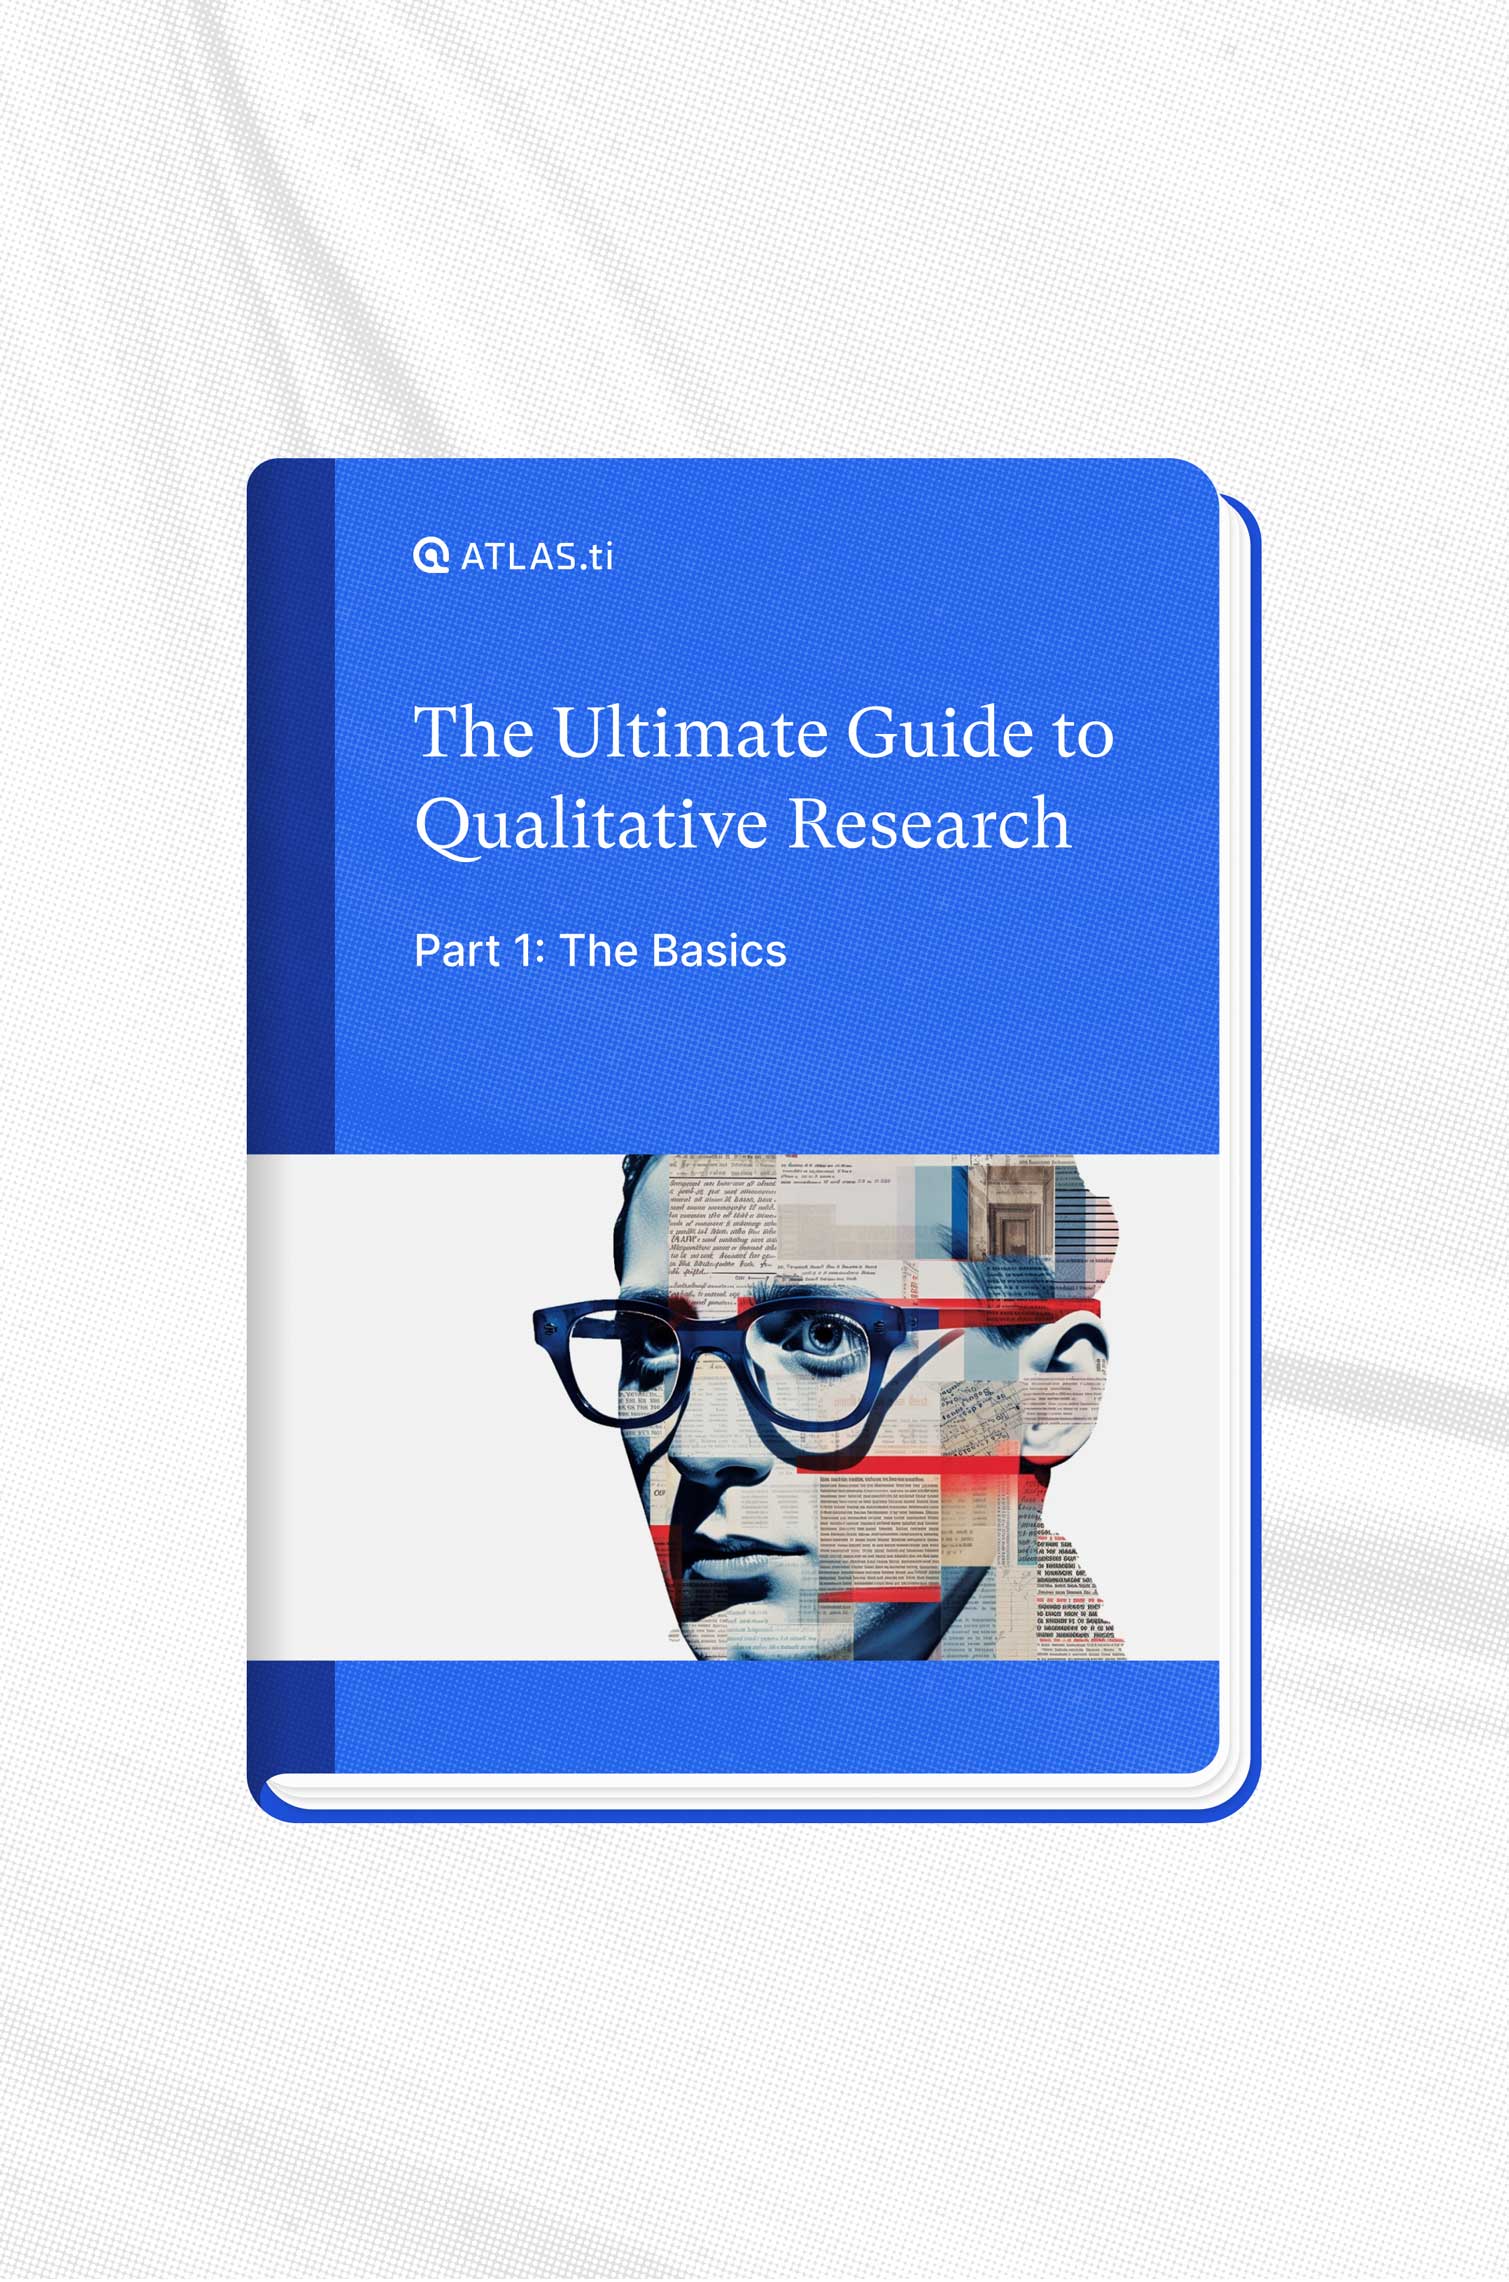 what data analysis is used for qualitative research